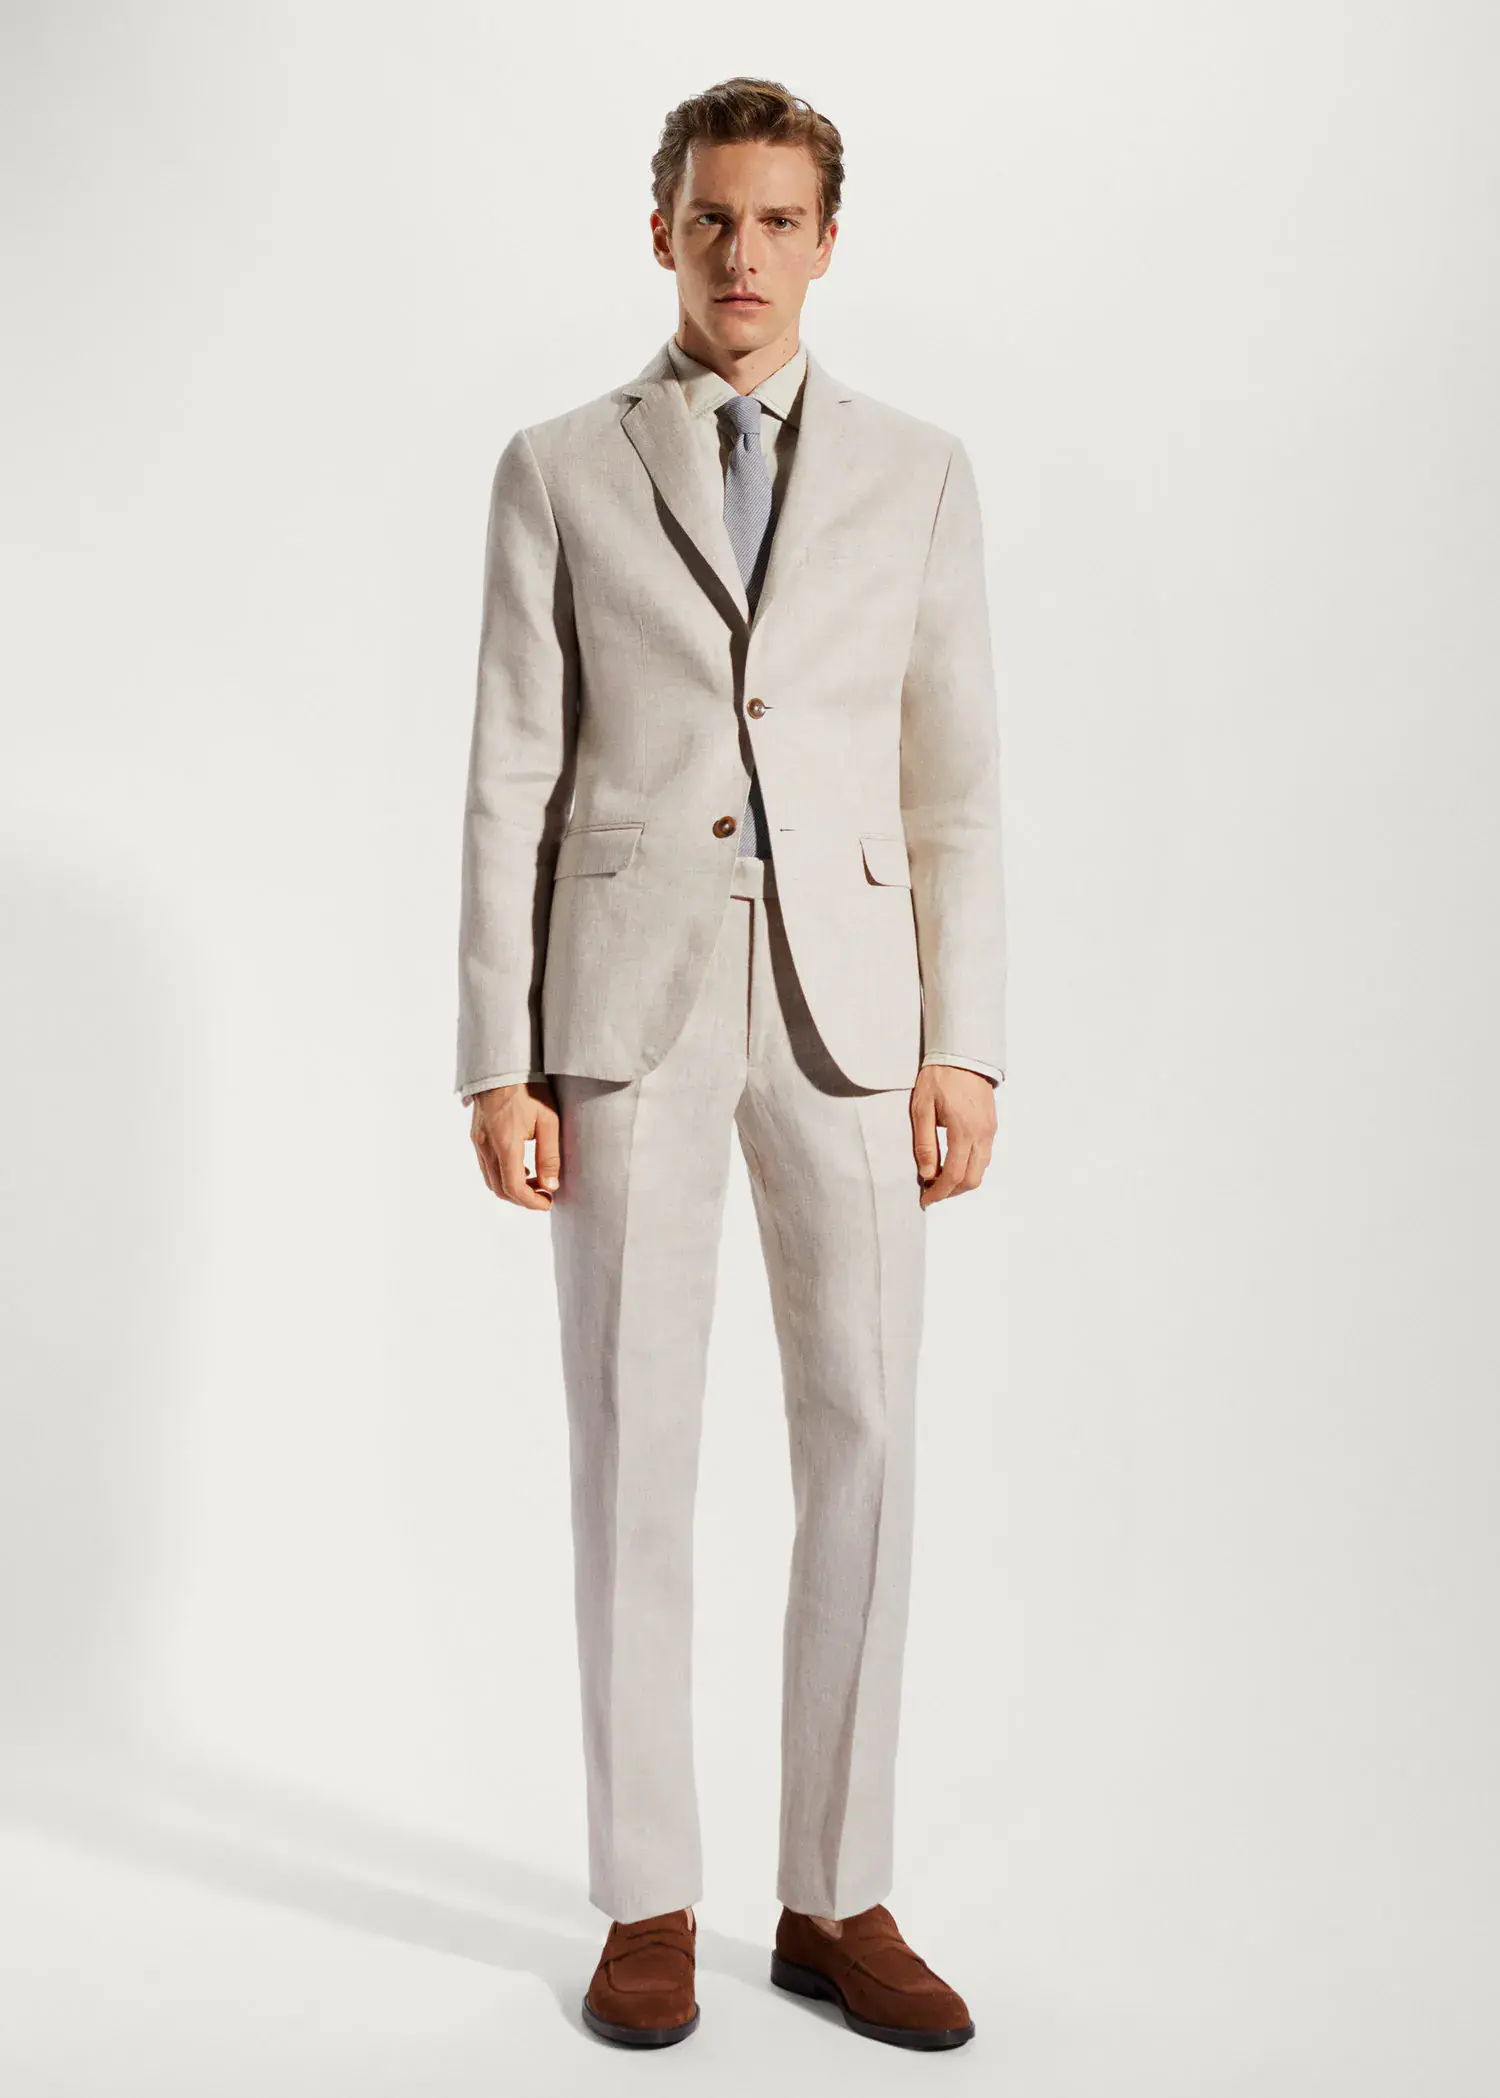 Mango 100% linen suit blazer. a man wearing a suit and tie standing in front of a white wall. 